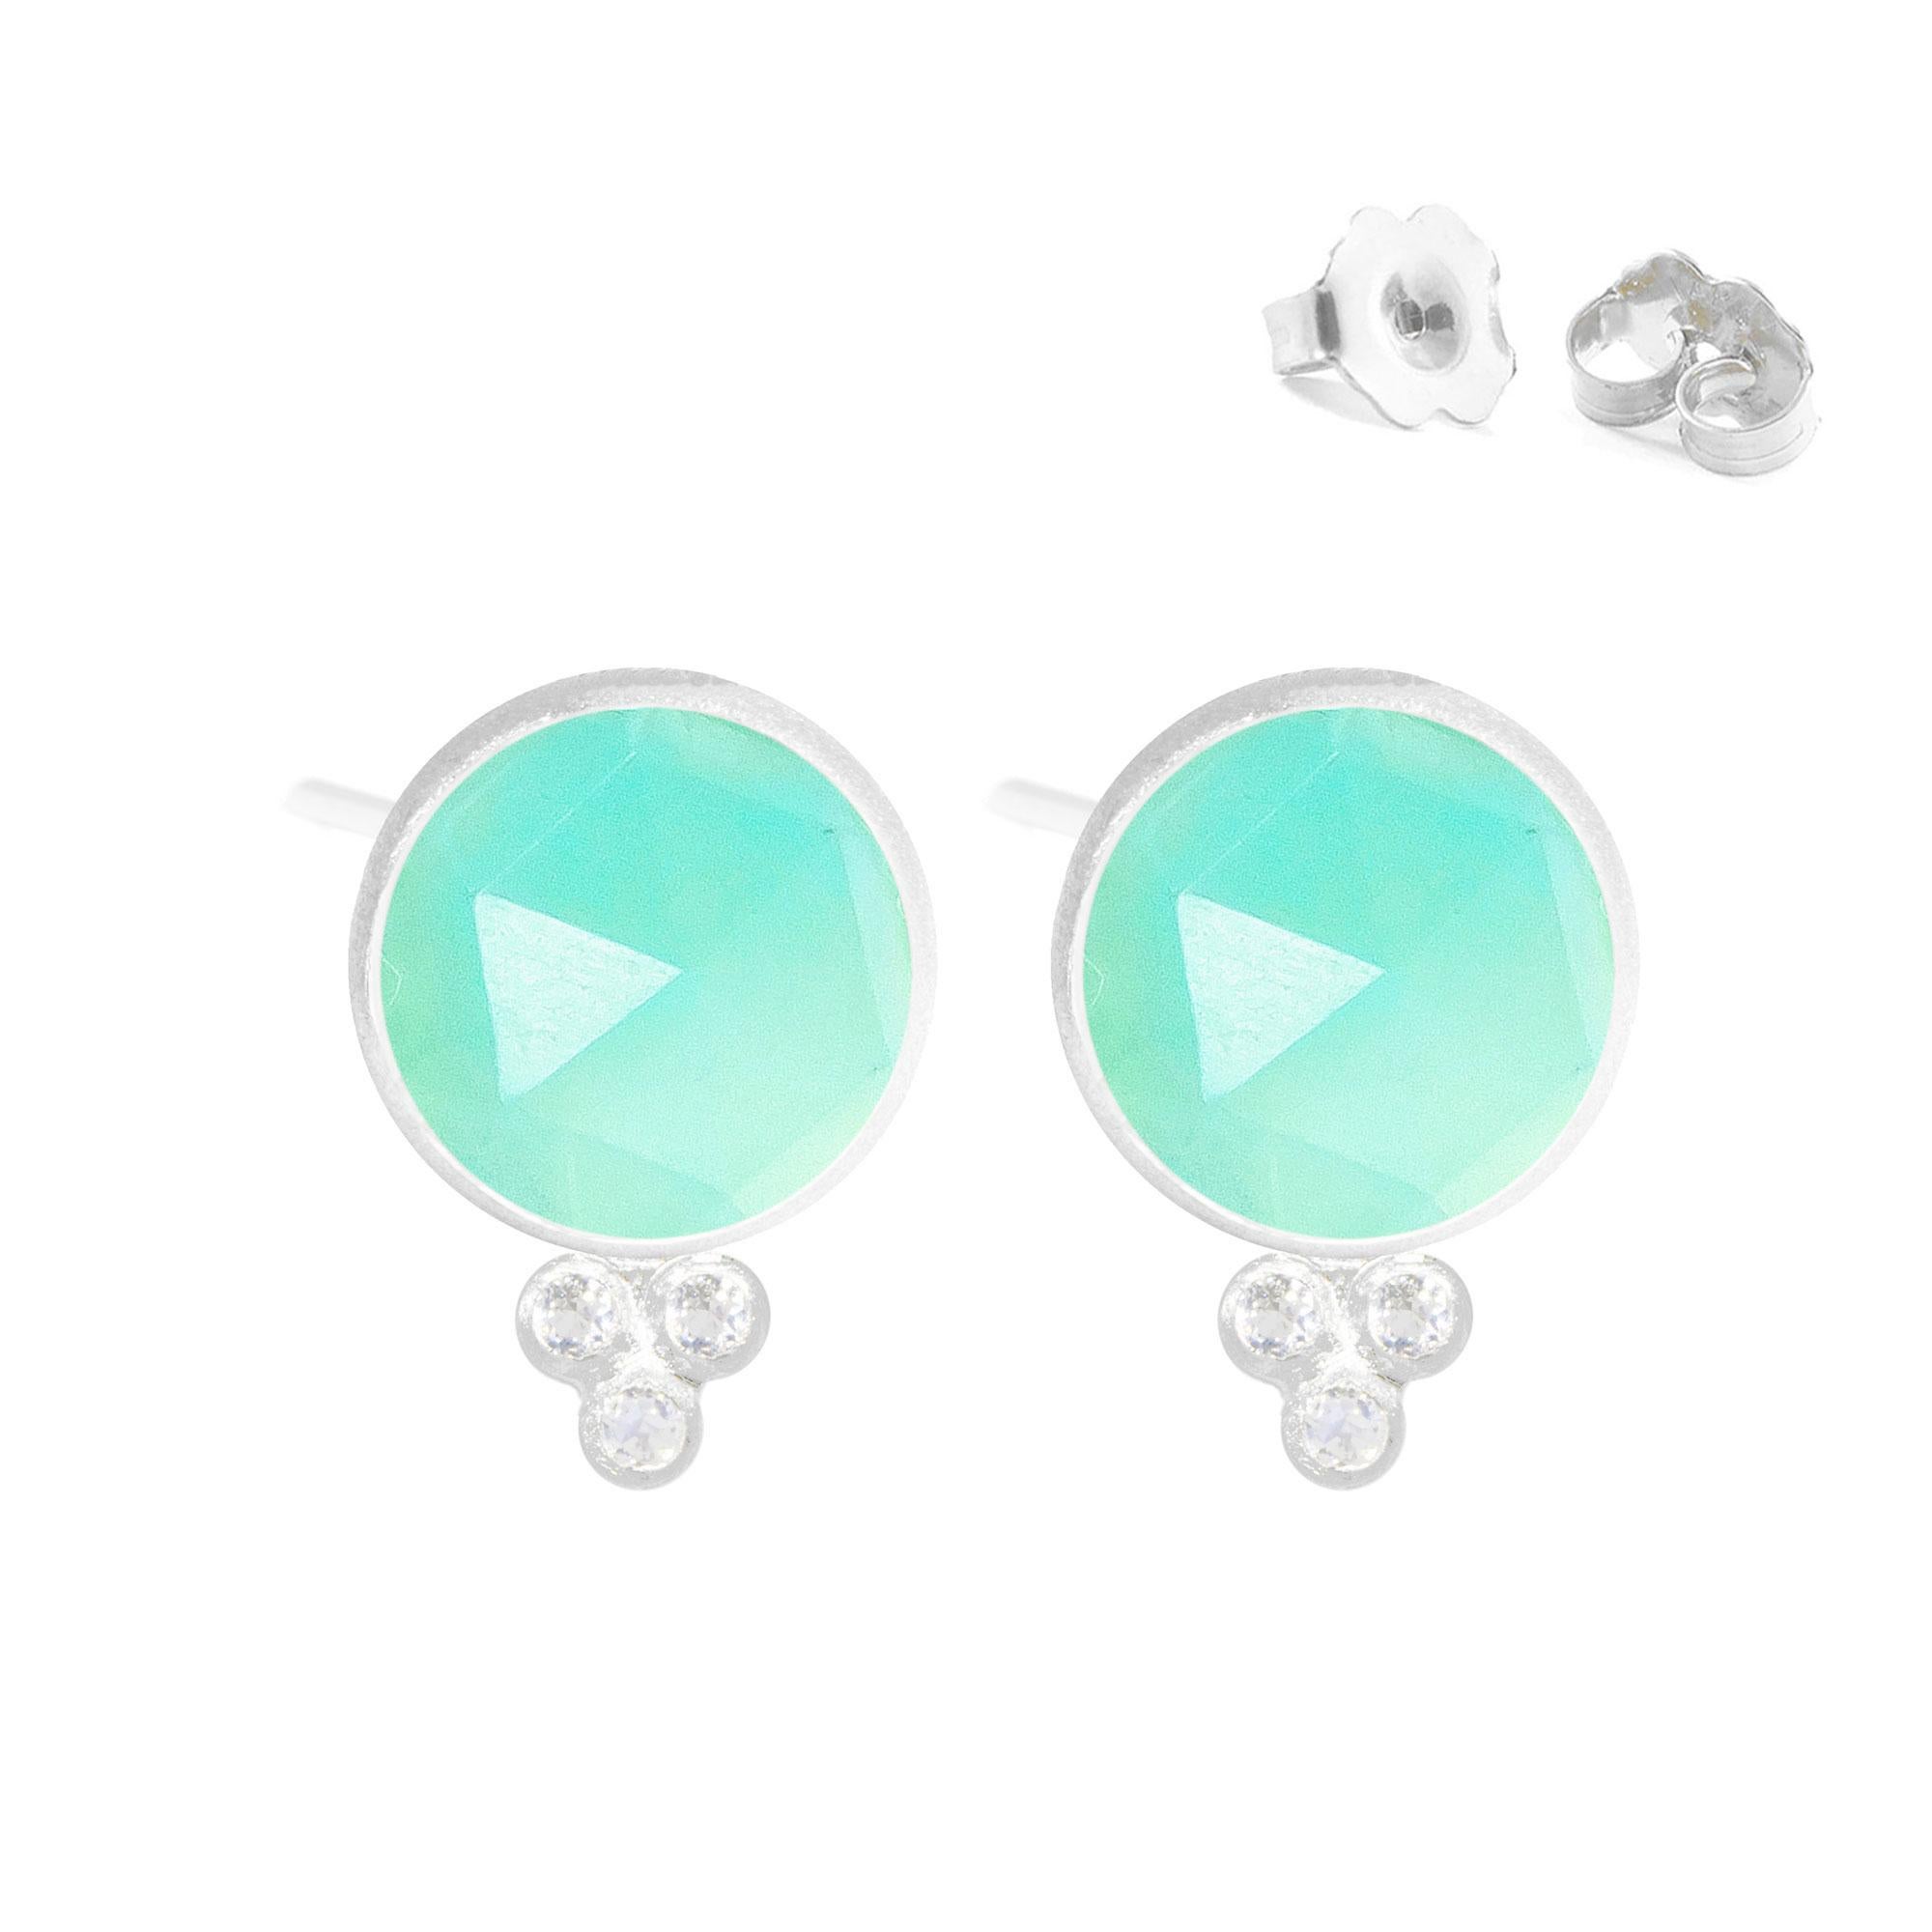 A Nina Nguyen classic: Our Chloe Silver Studs are designed with faceted chrysoprases rimmed in silver, and accented with gemstones for some extra sparkle.
Nina Nguyen Design's patent-pending earrings have an element on the back of the stud or charm